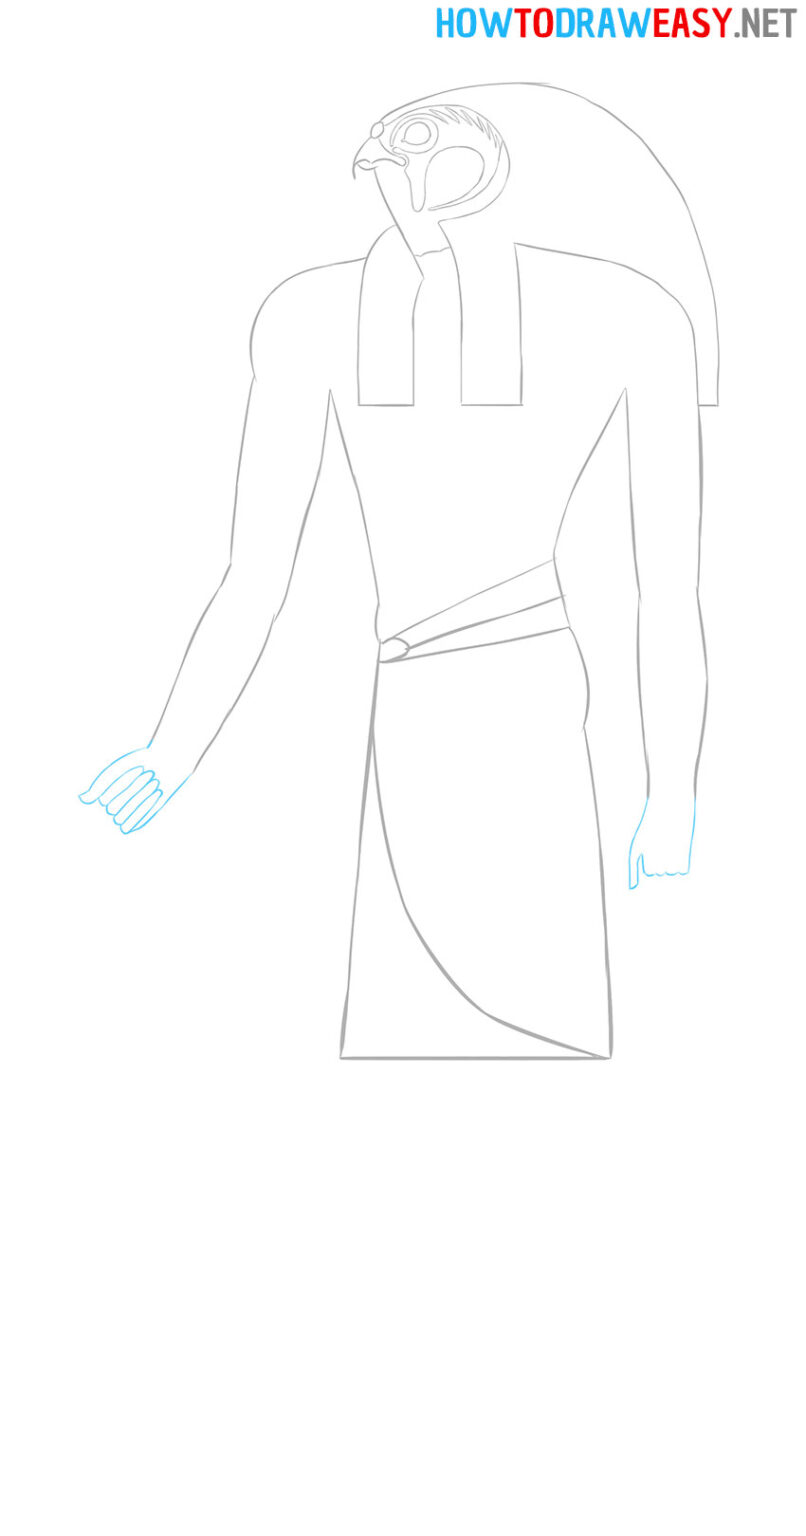 How to Draw Ra How to Draw Easy